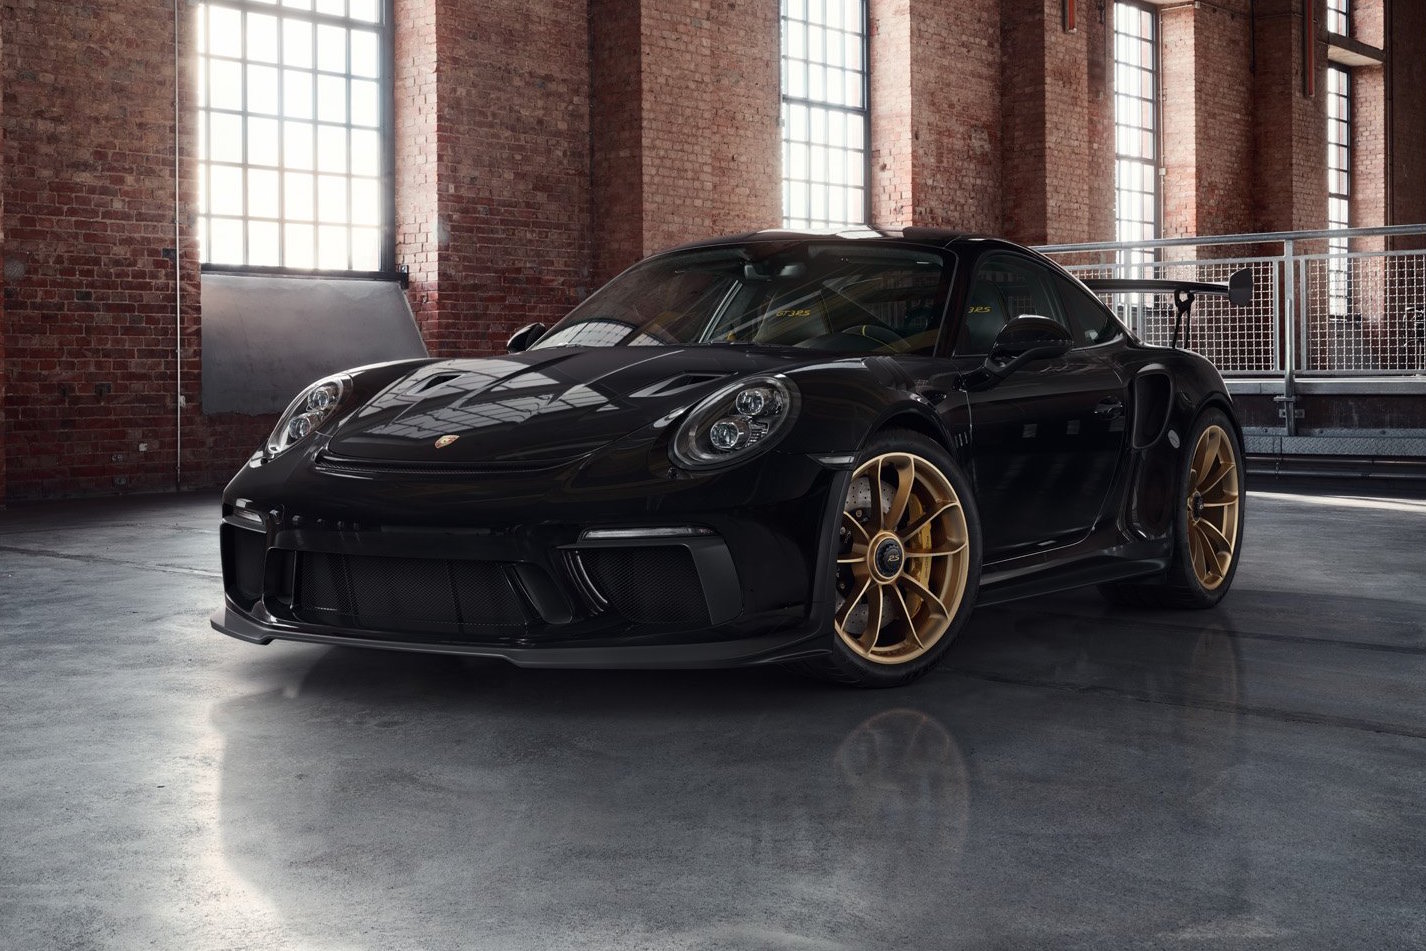 Porsche Exclusive does its thing with the 2018 911 GT3 RS